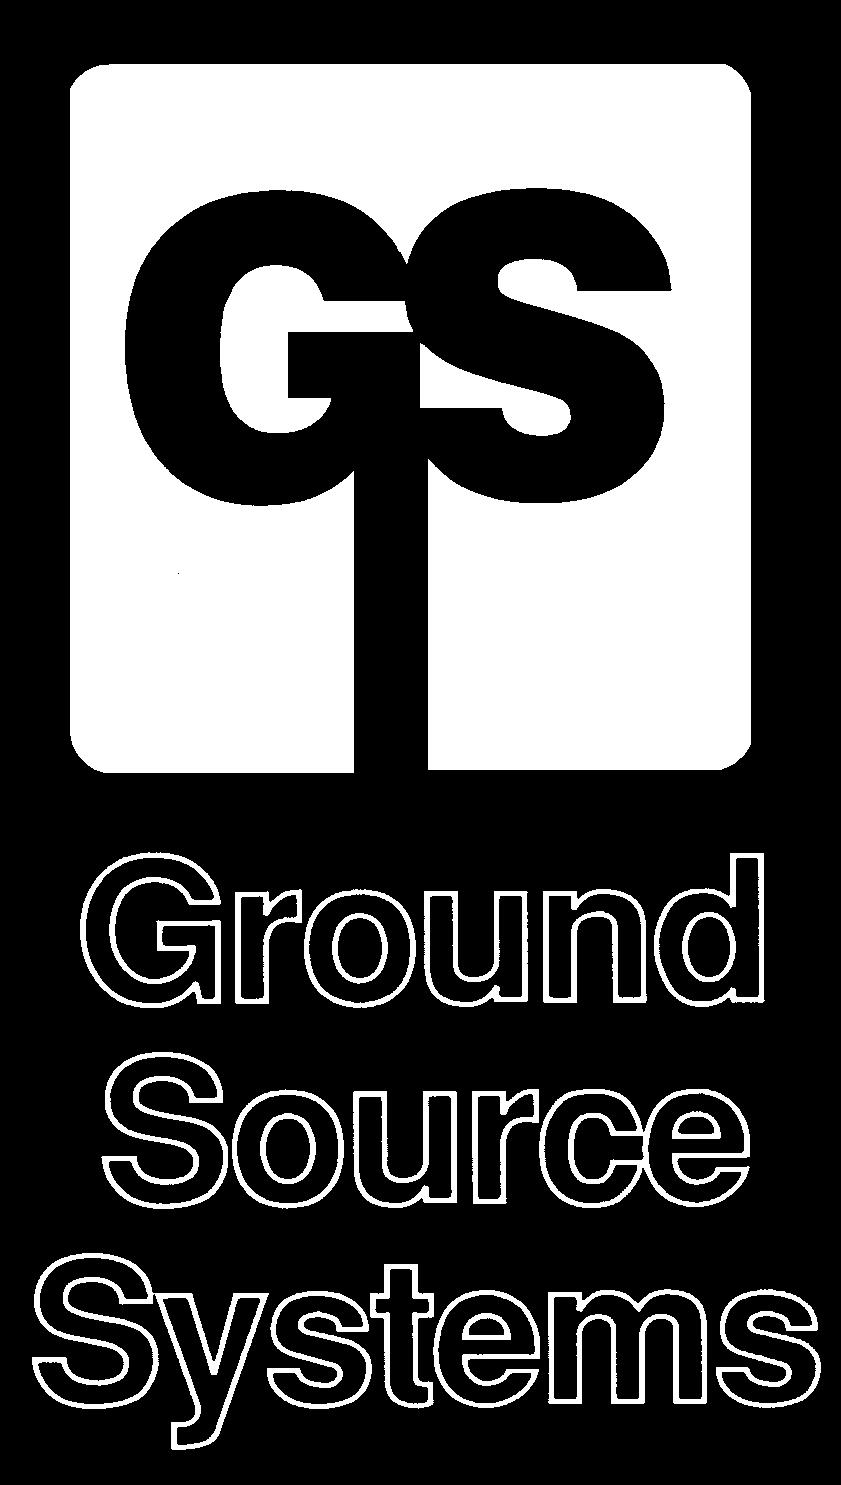 For more information about Ground Source